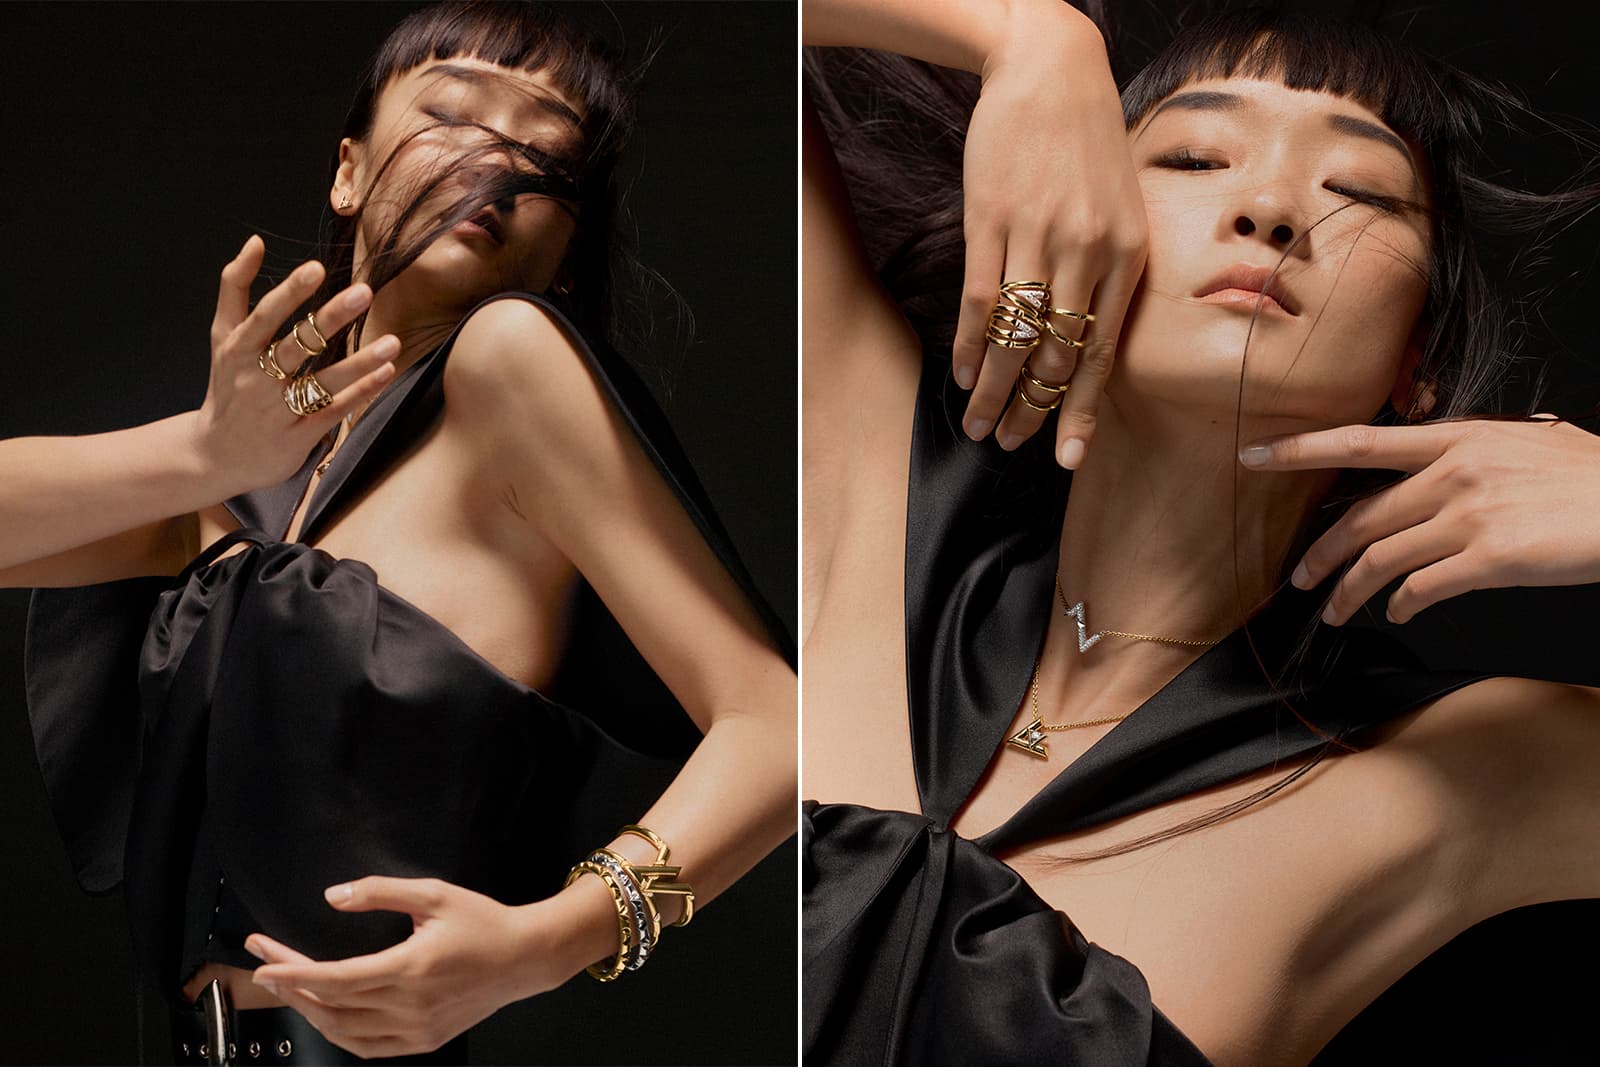 LV Volt - the new graphic collection of unisex jewelry from Louis